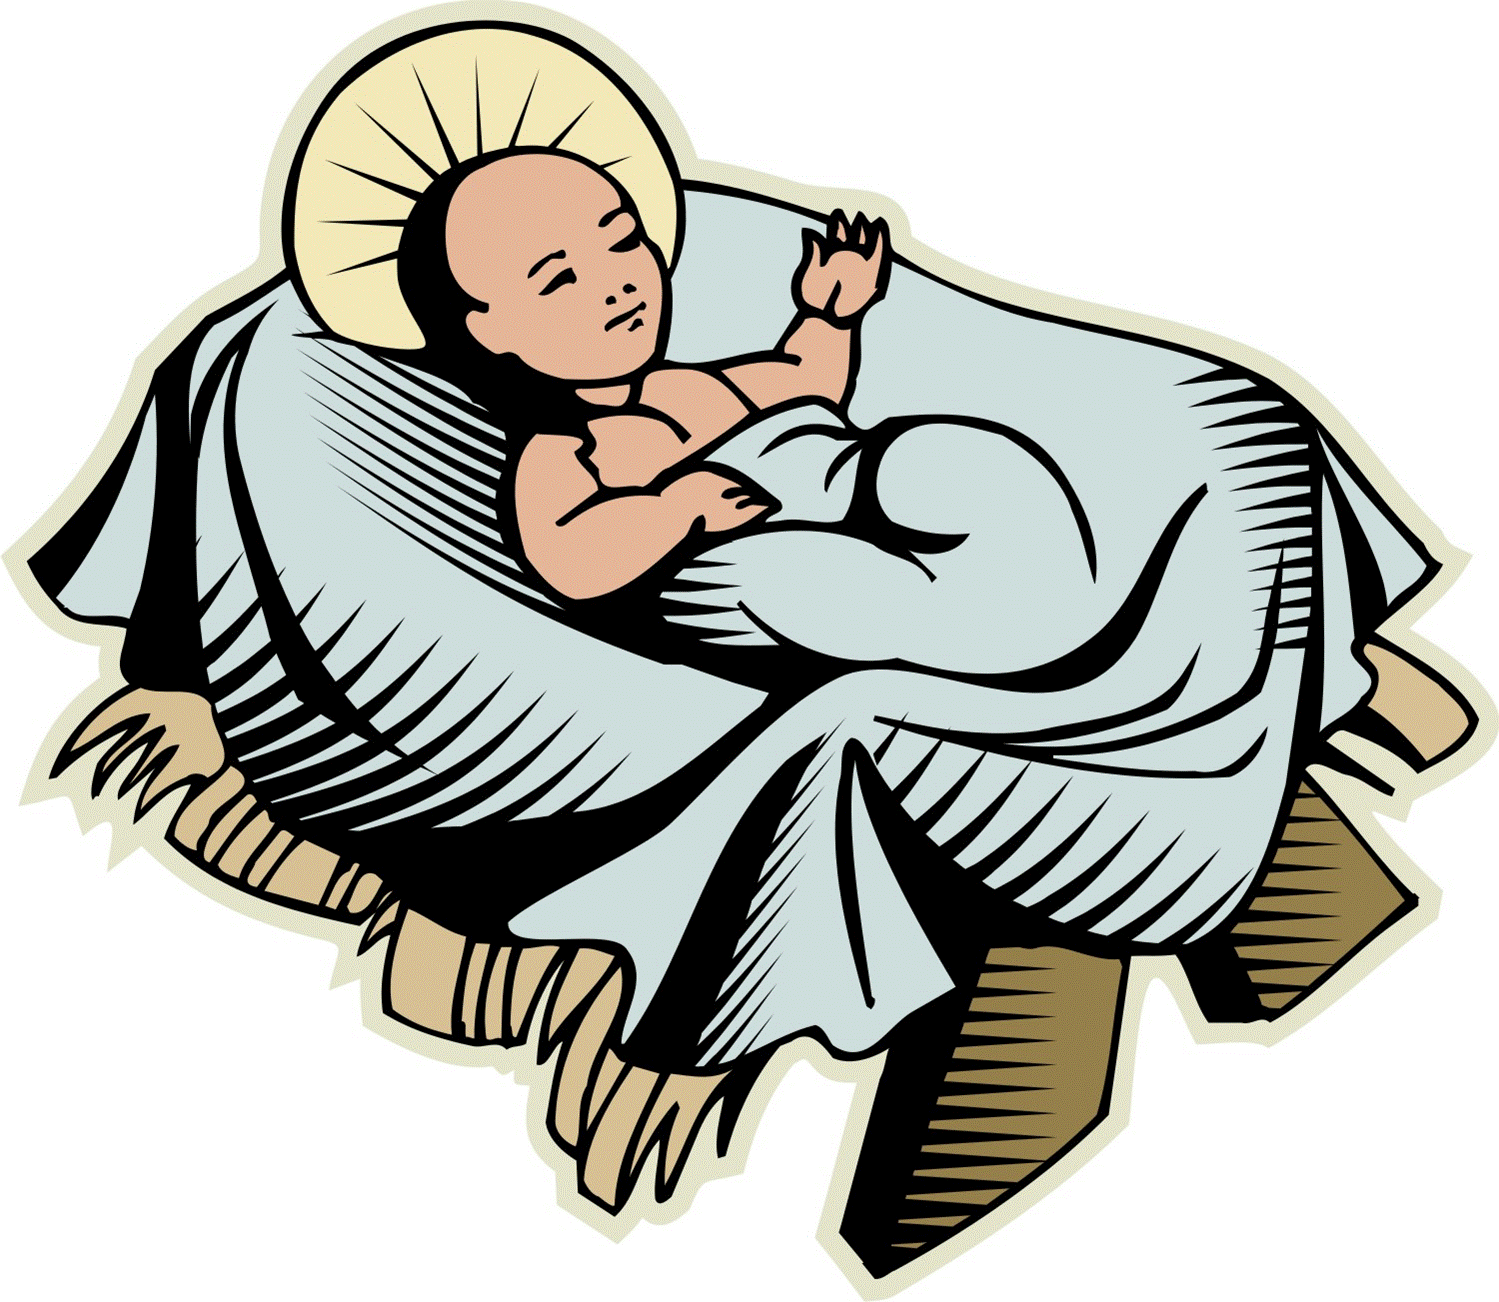 Picture Of Baby Jesus In A Manger - ClipArt Best